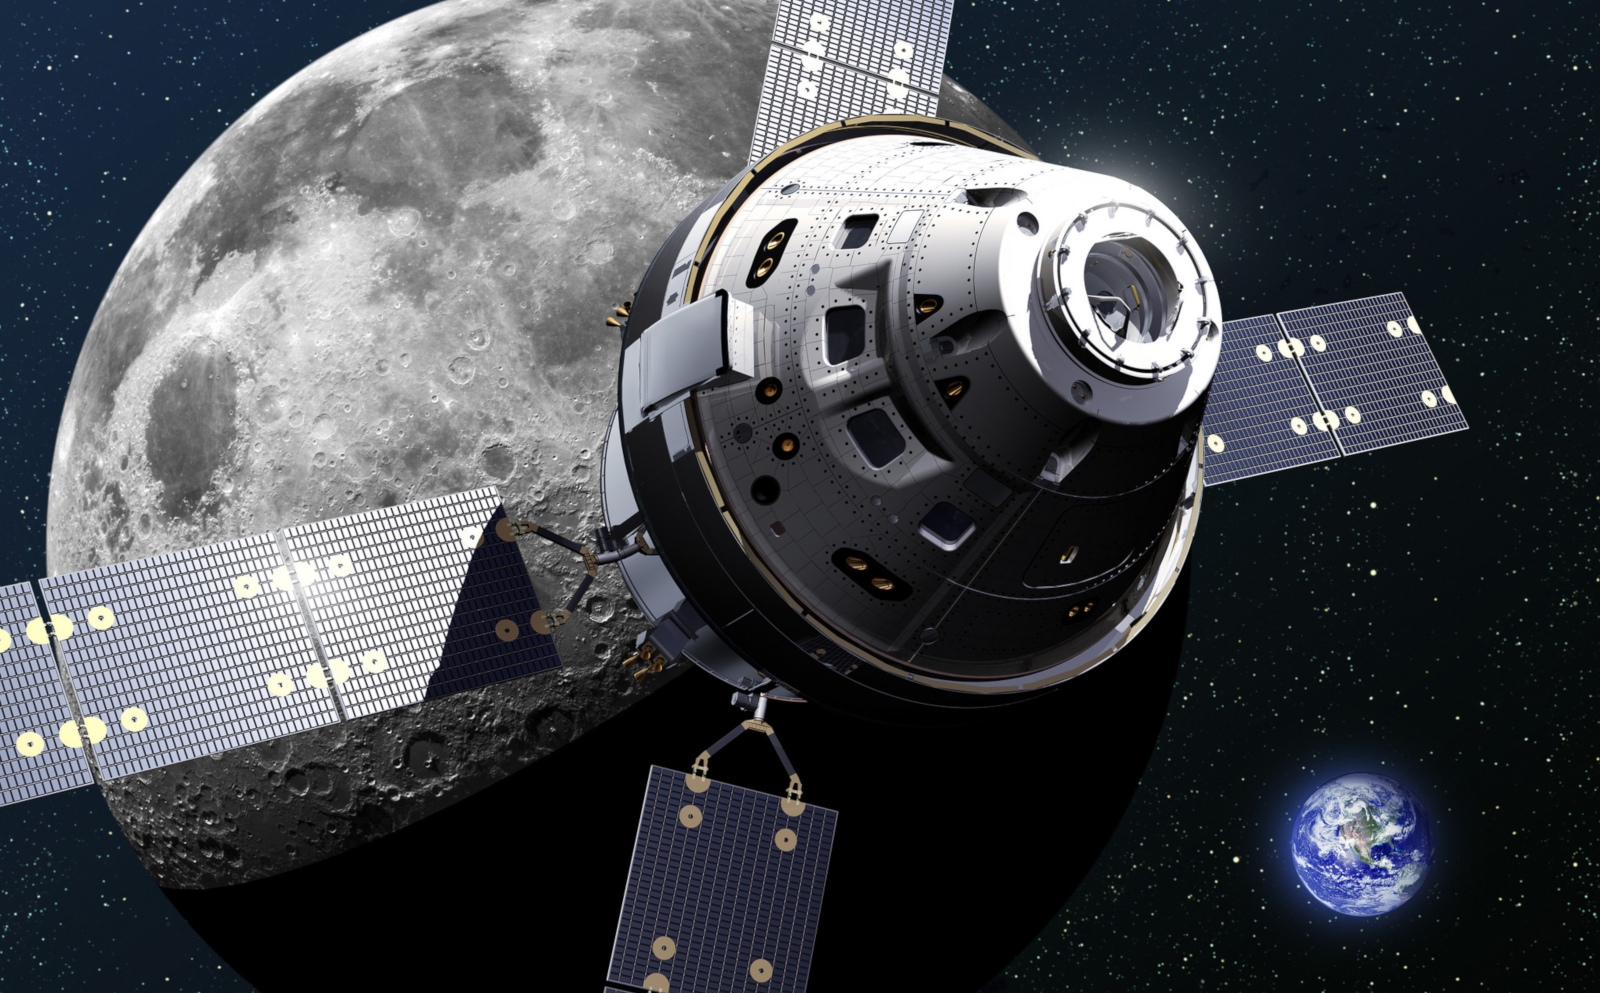 Lockheed Martin wants input on commercial payloads for Orion | DeviceDaily.com